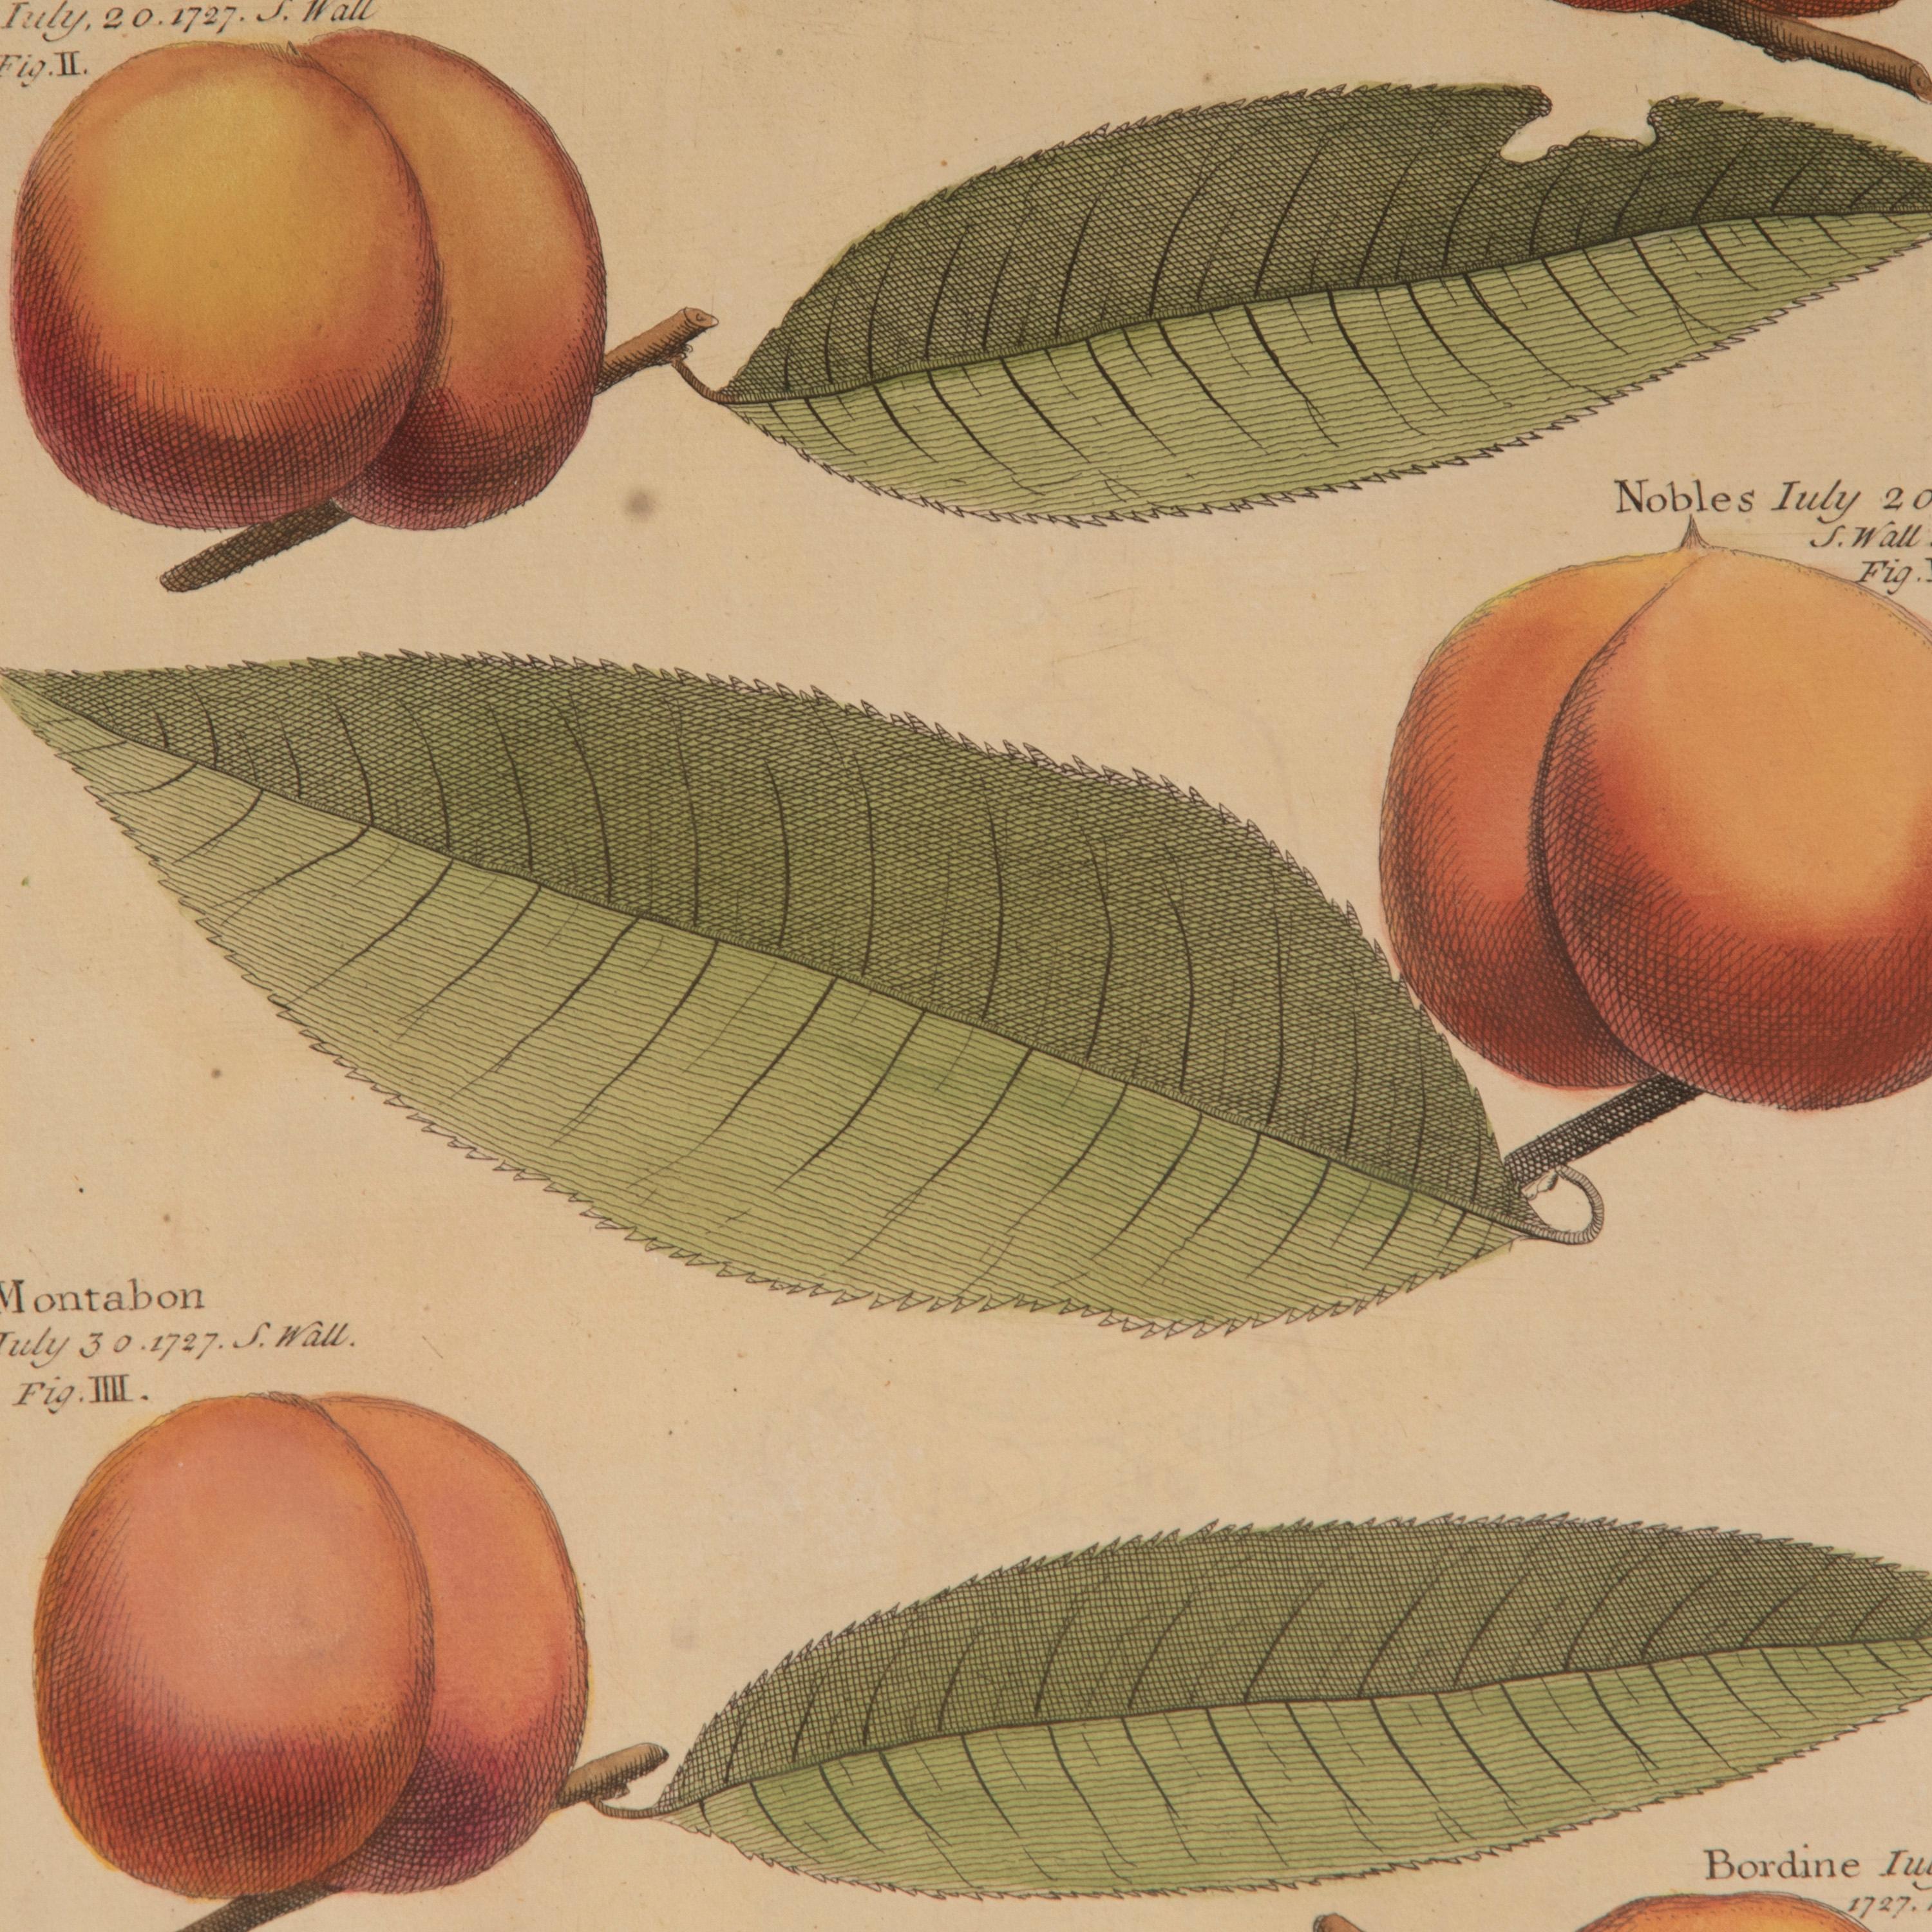 Country Set of Four 18th Century Fruit Prints by Batty Langley